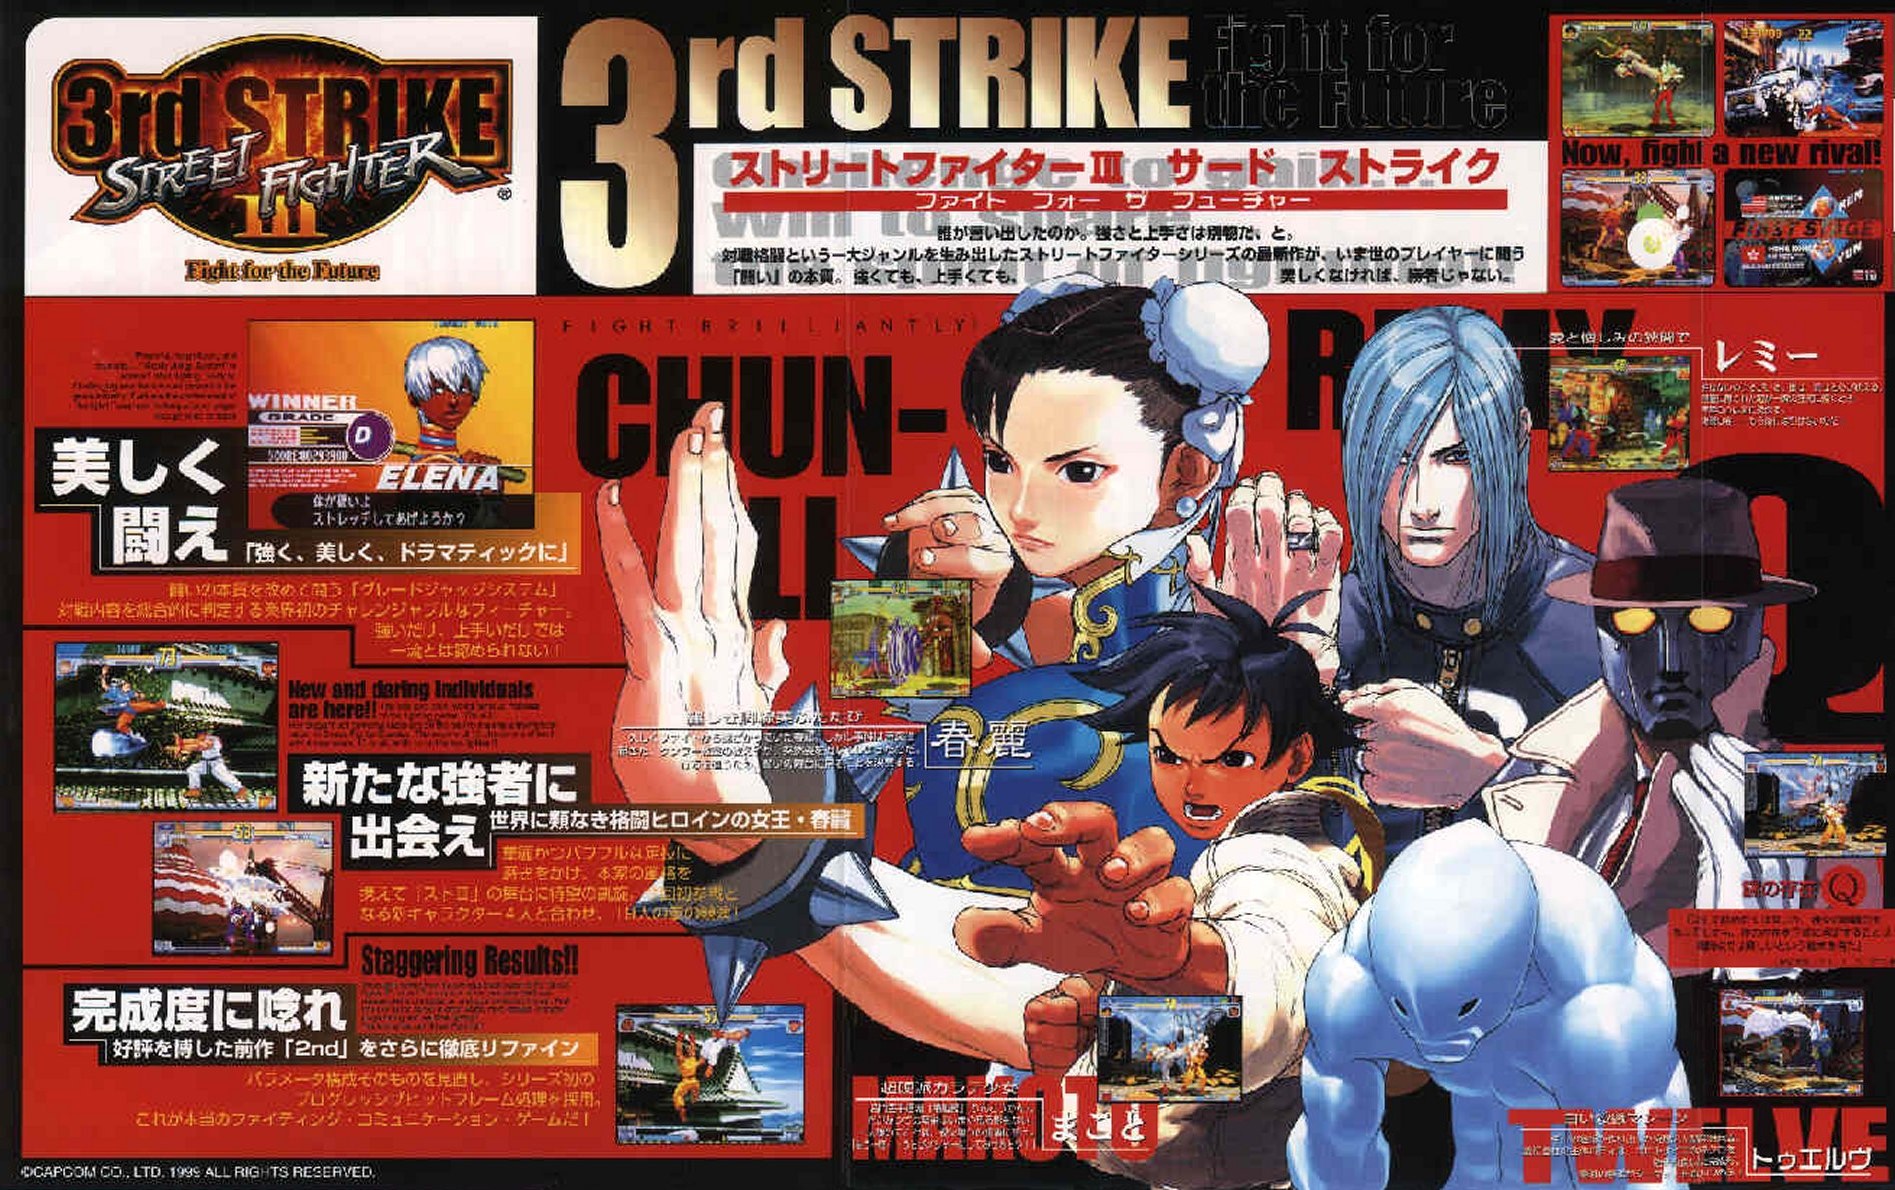 Street Fighter Iii 3rd Strike Fight For The Future Details Launchbox Games Database